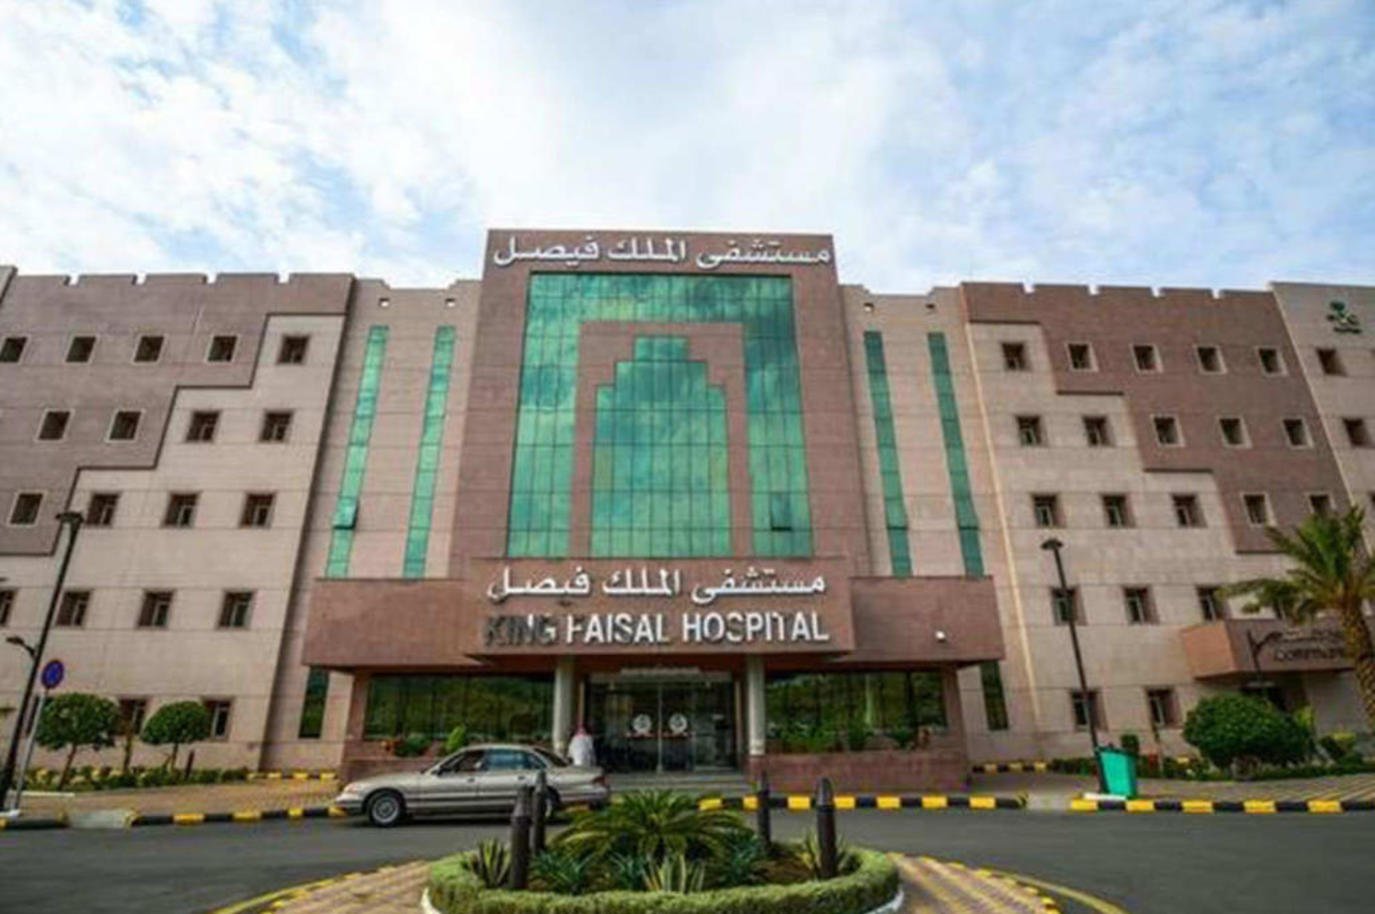 King Faisal Specialist Hospital announces the availability of 197 vacancies for high school, diploma and bachelor's degree holders